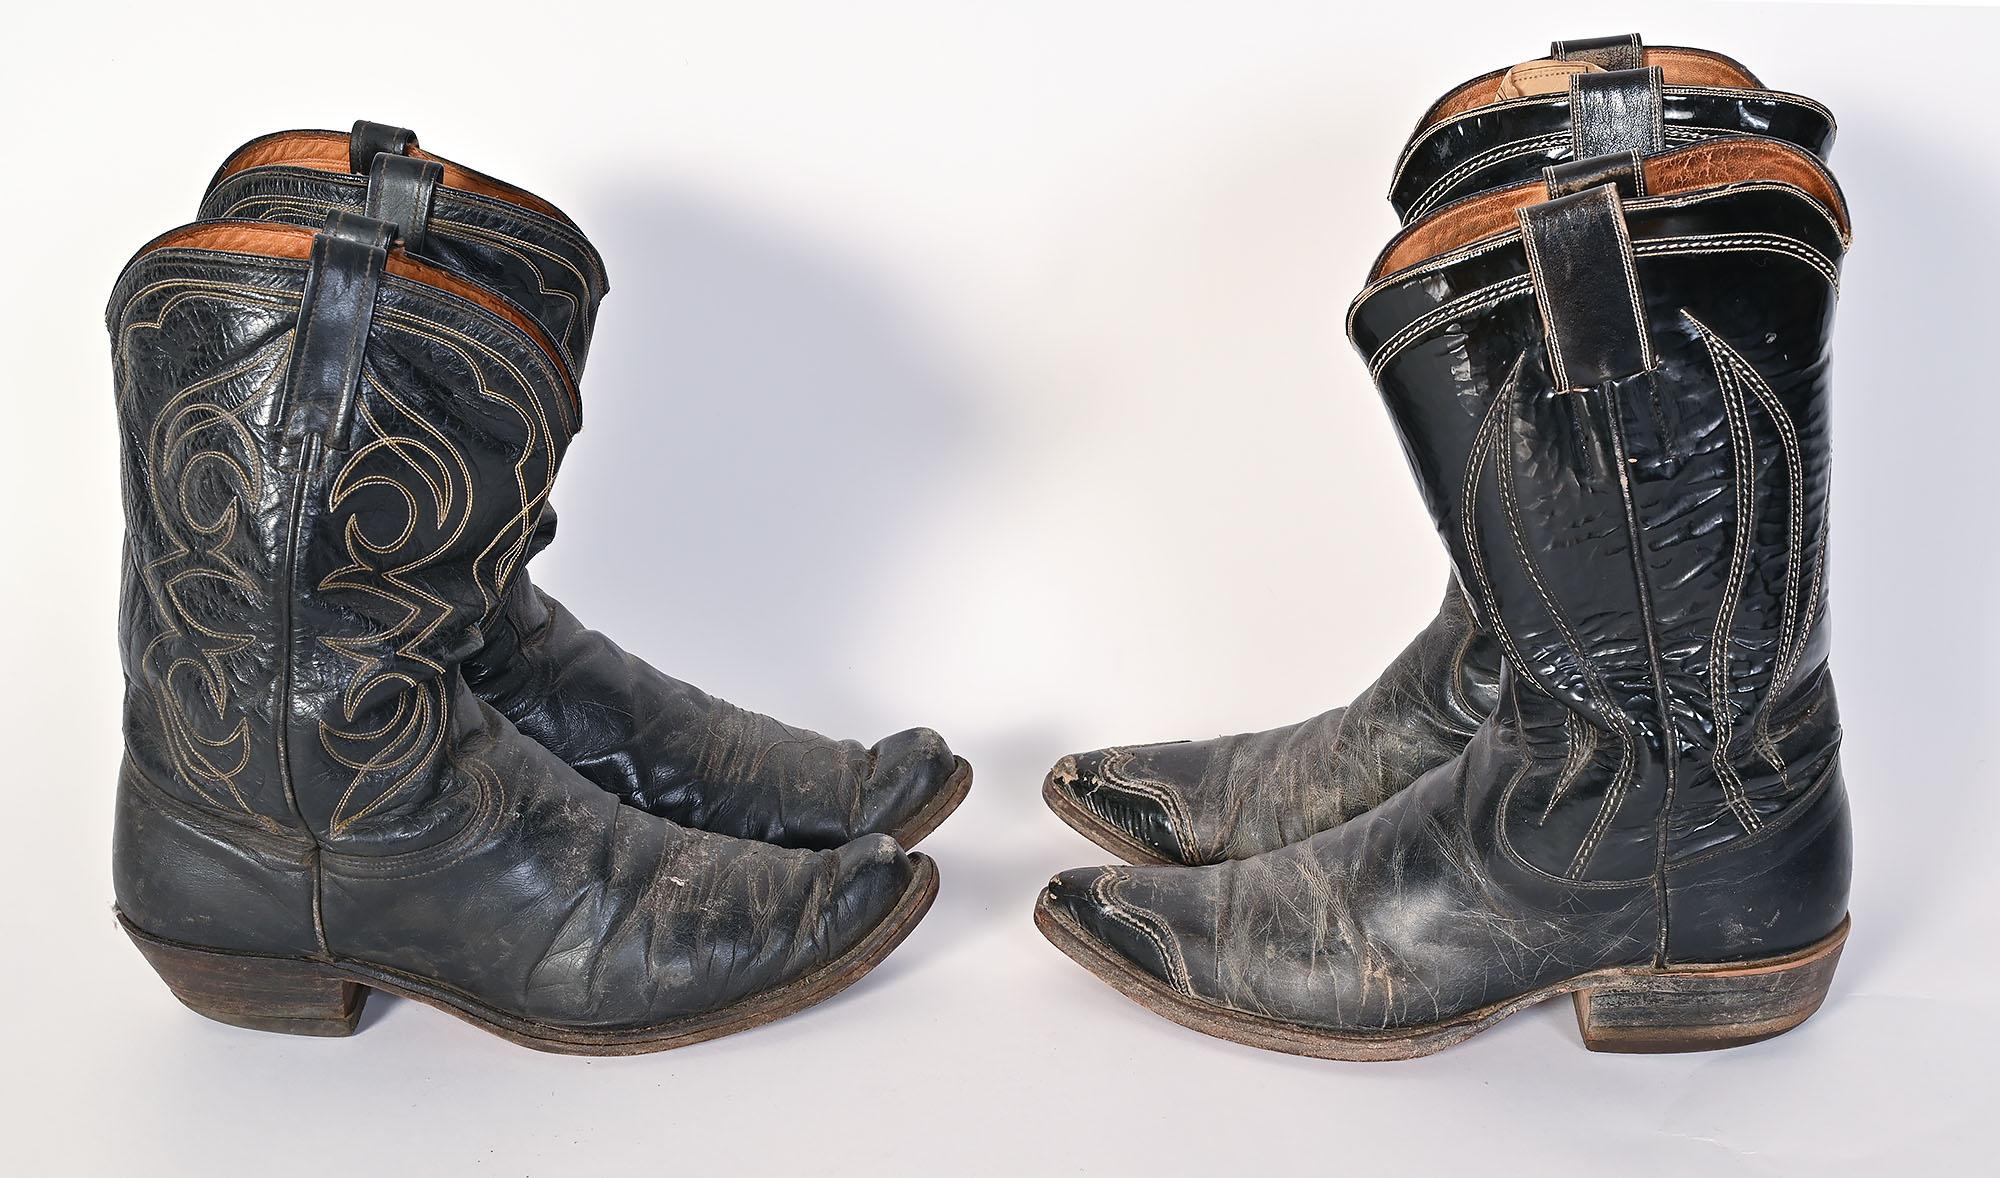 On offer are two pairs of cowboy boots that belonged to Roy Rogers, 